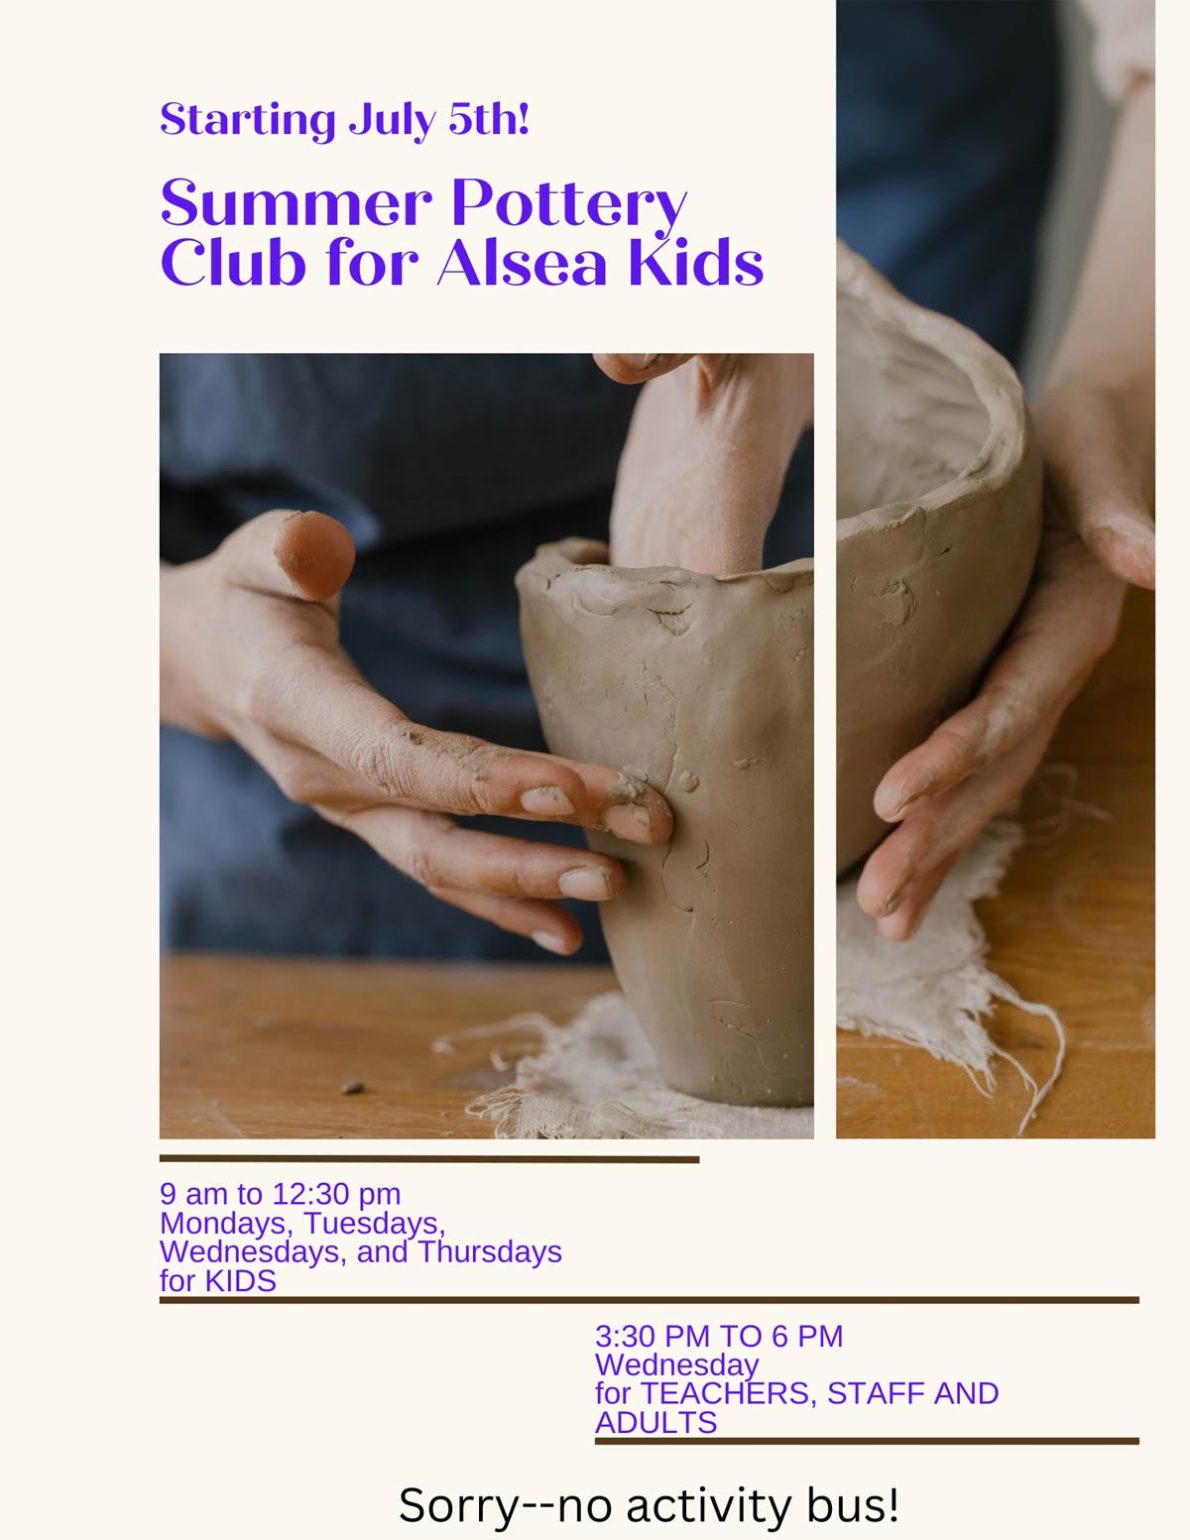 Summer Pottery Club - Starting July 5th